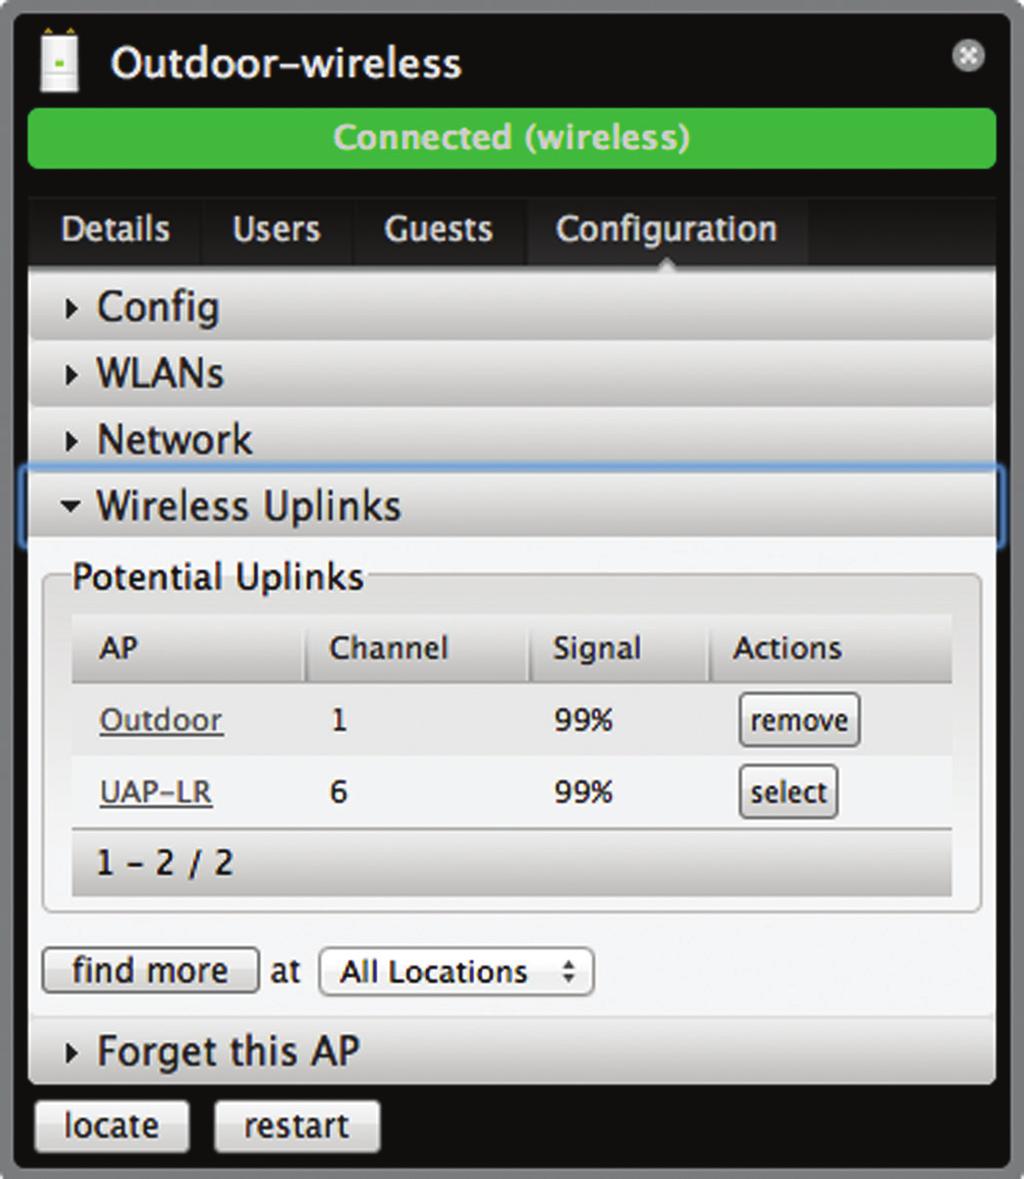 Wireless Uplinks When an Access Point is not connected by a wire, Wireless Uplinks lists potential uplink Access Points that can be selected to establish a wireless connection.